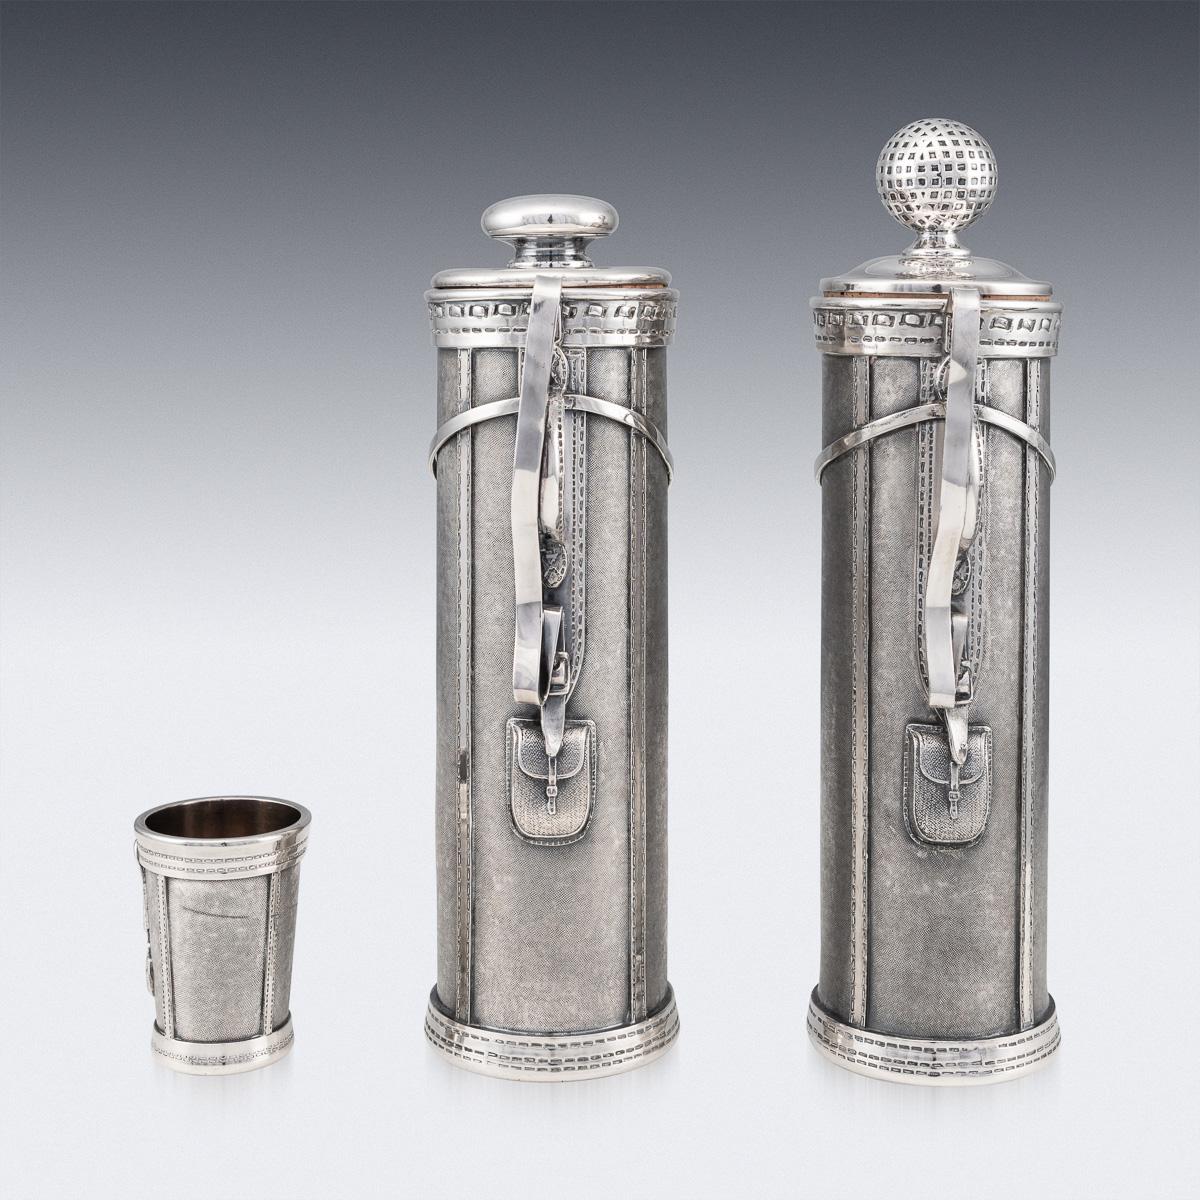 Superb 20th century Swedish silver plated cocktail shaker with six glasses on a stand with silver gilt interior. This cocktail shaker is in fabulous condition and is a must for any collector or just as a stand alone item, as useful today as it was